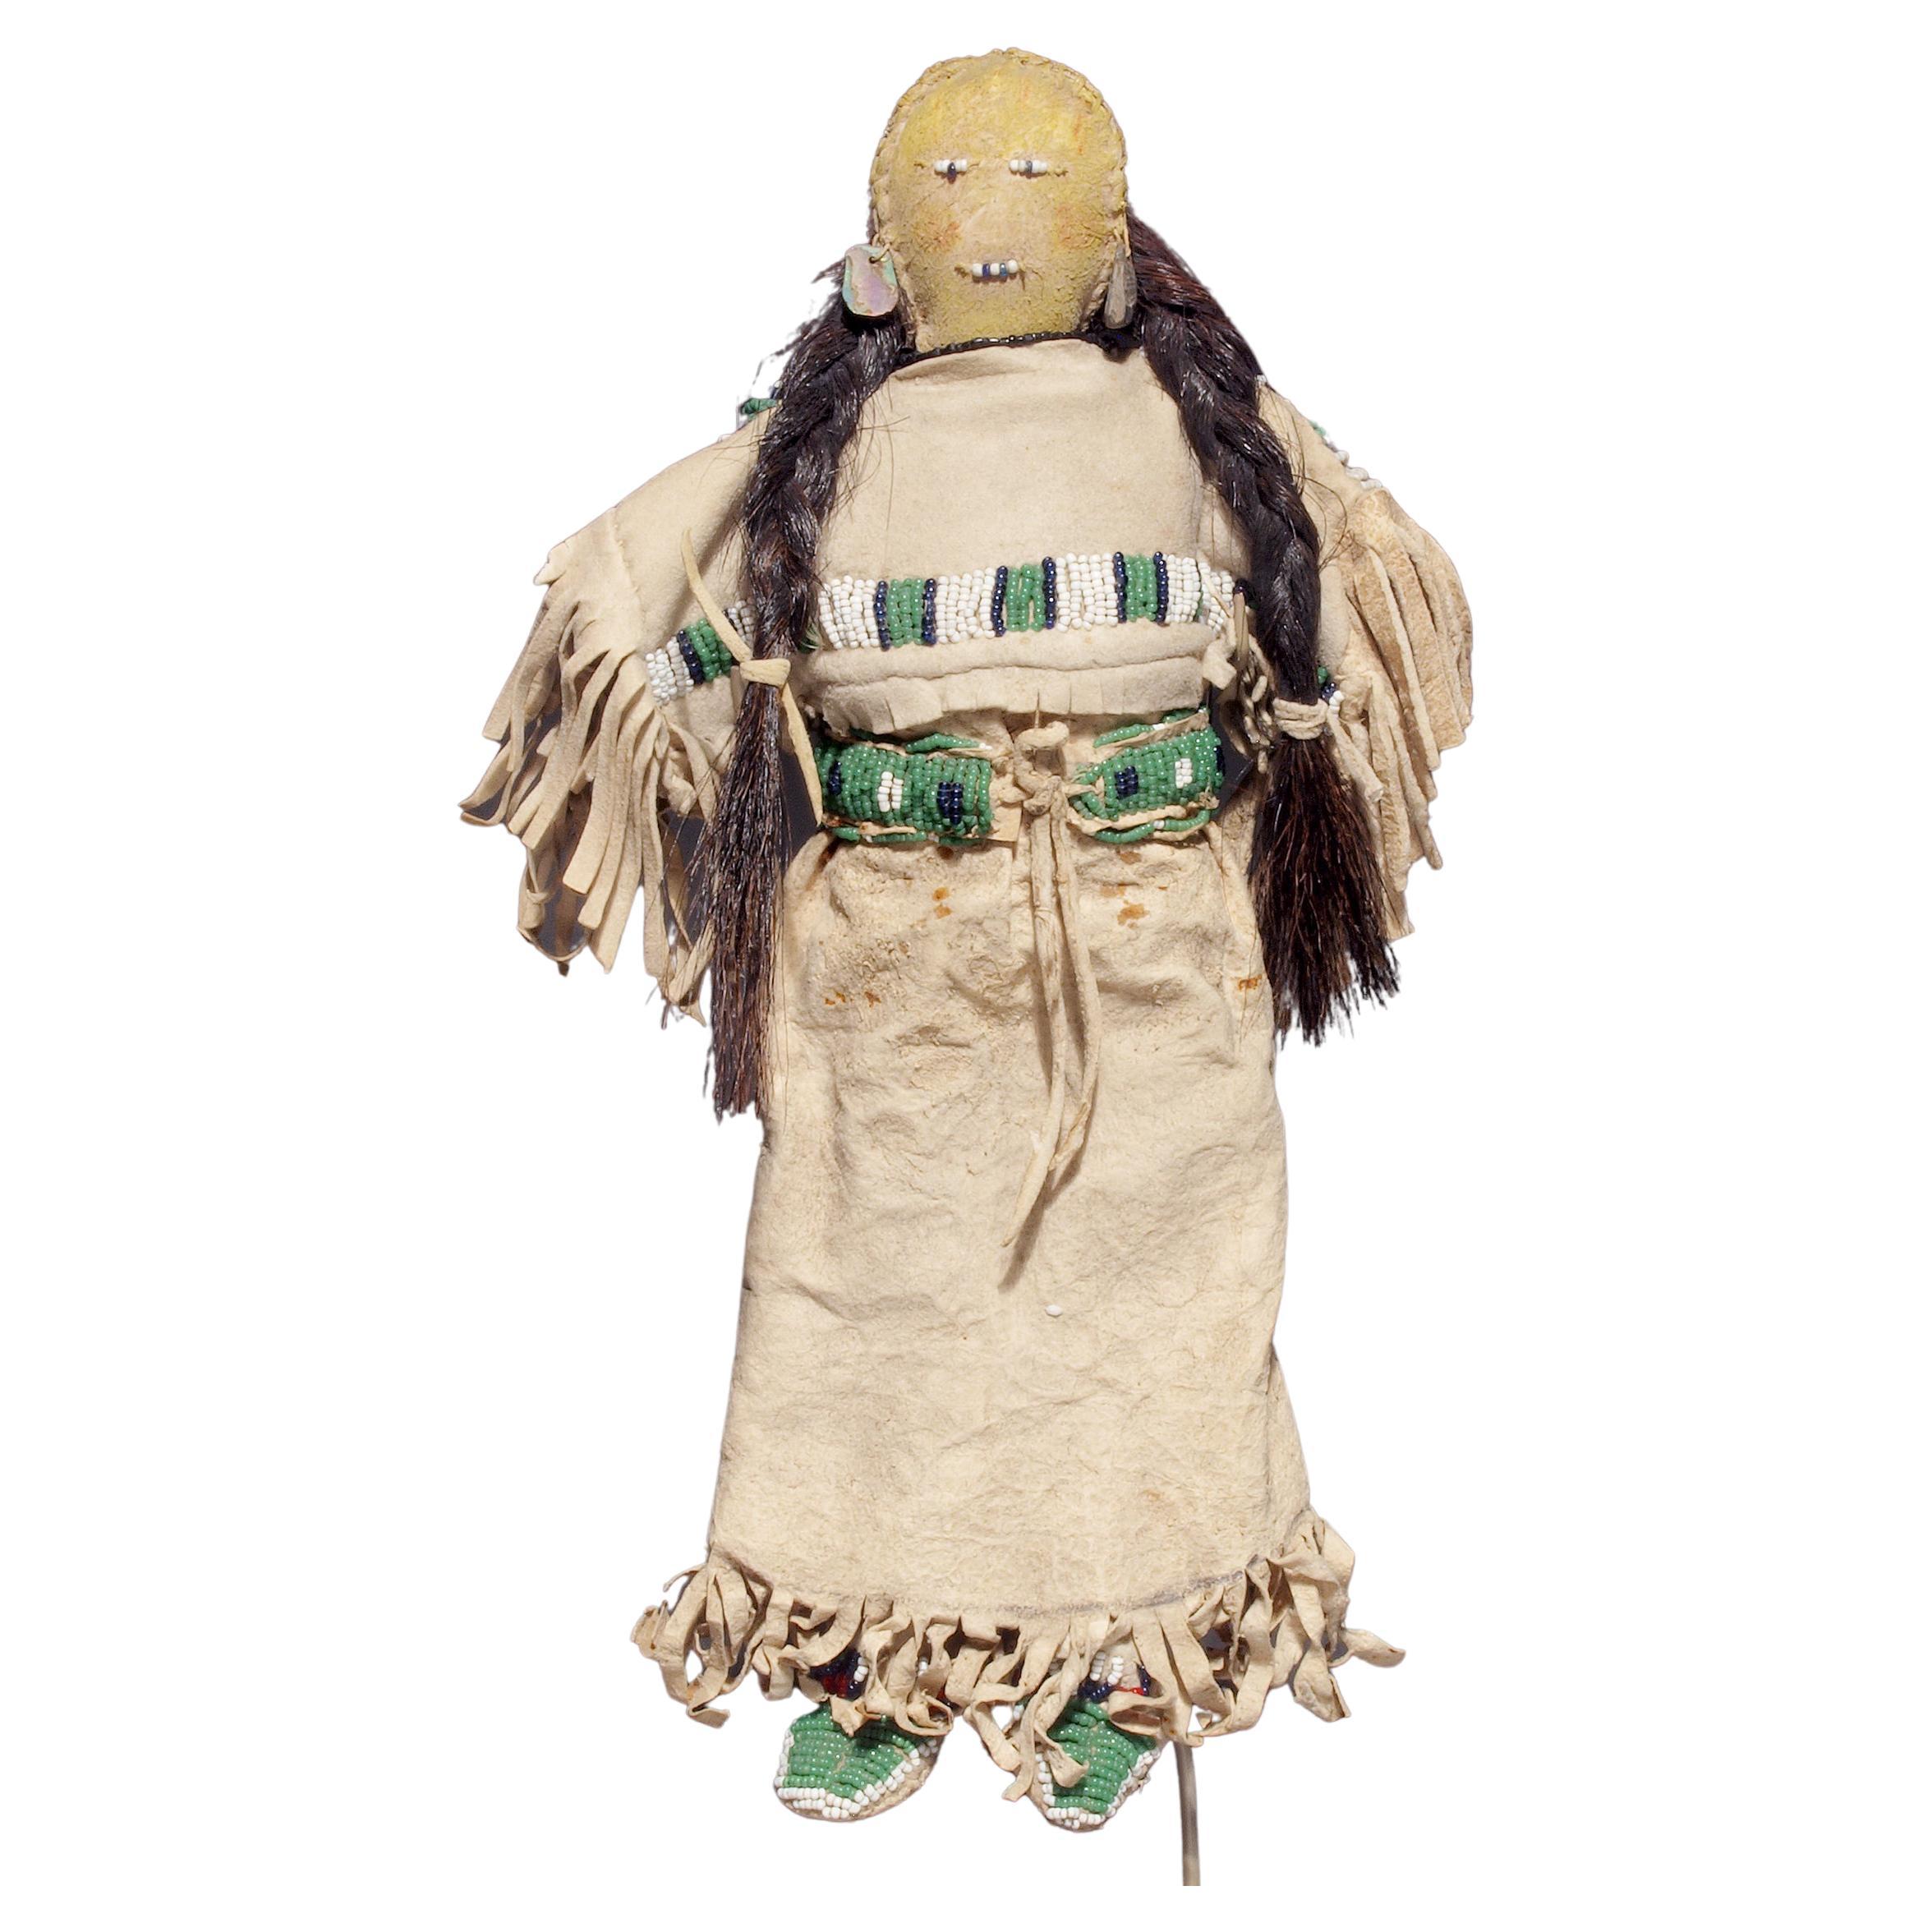 Antique Native American Doll, Sioux 'Plains Indian', 19th Century